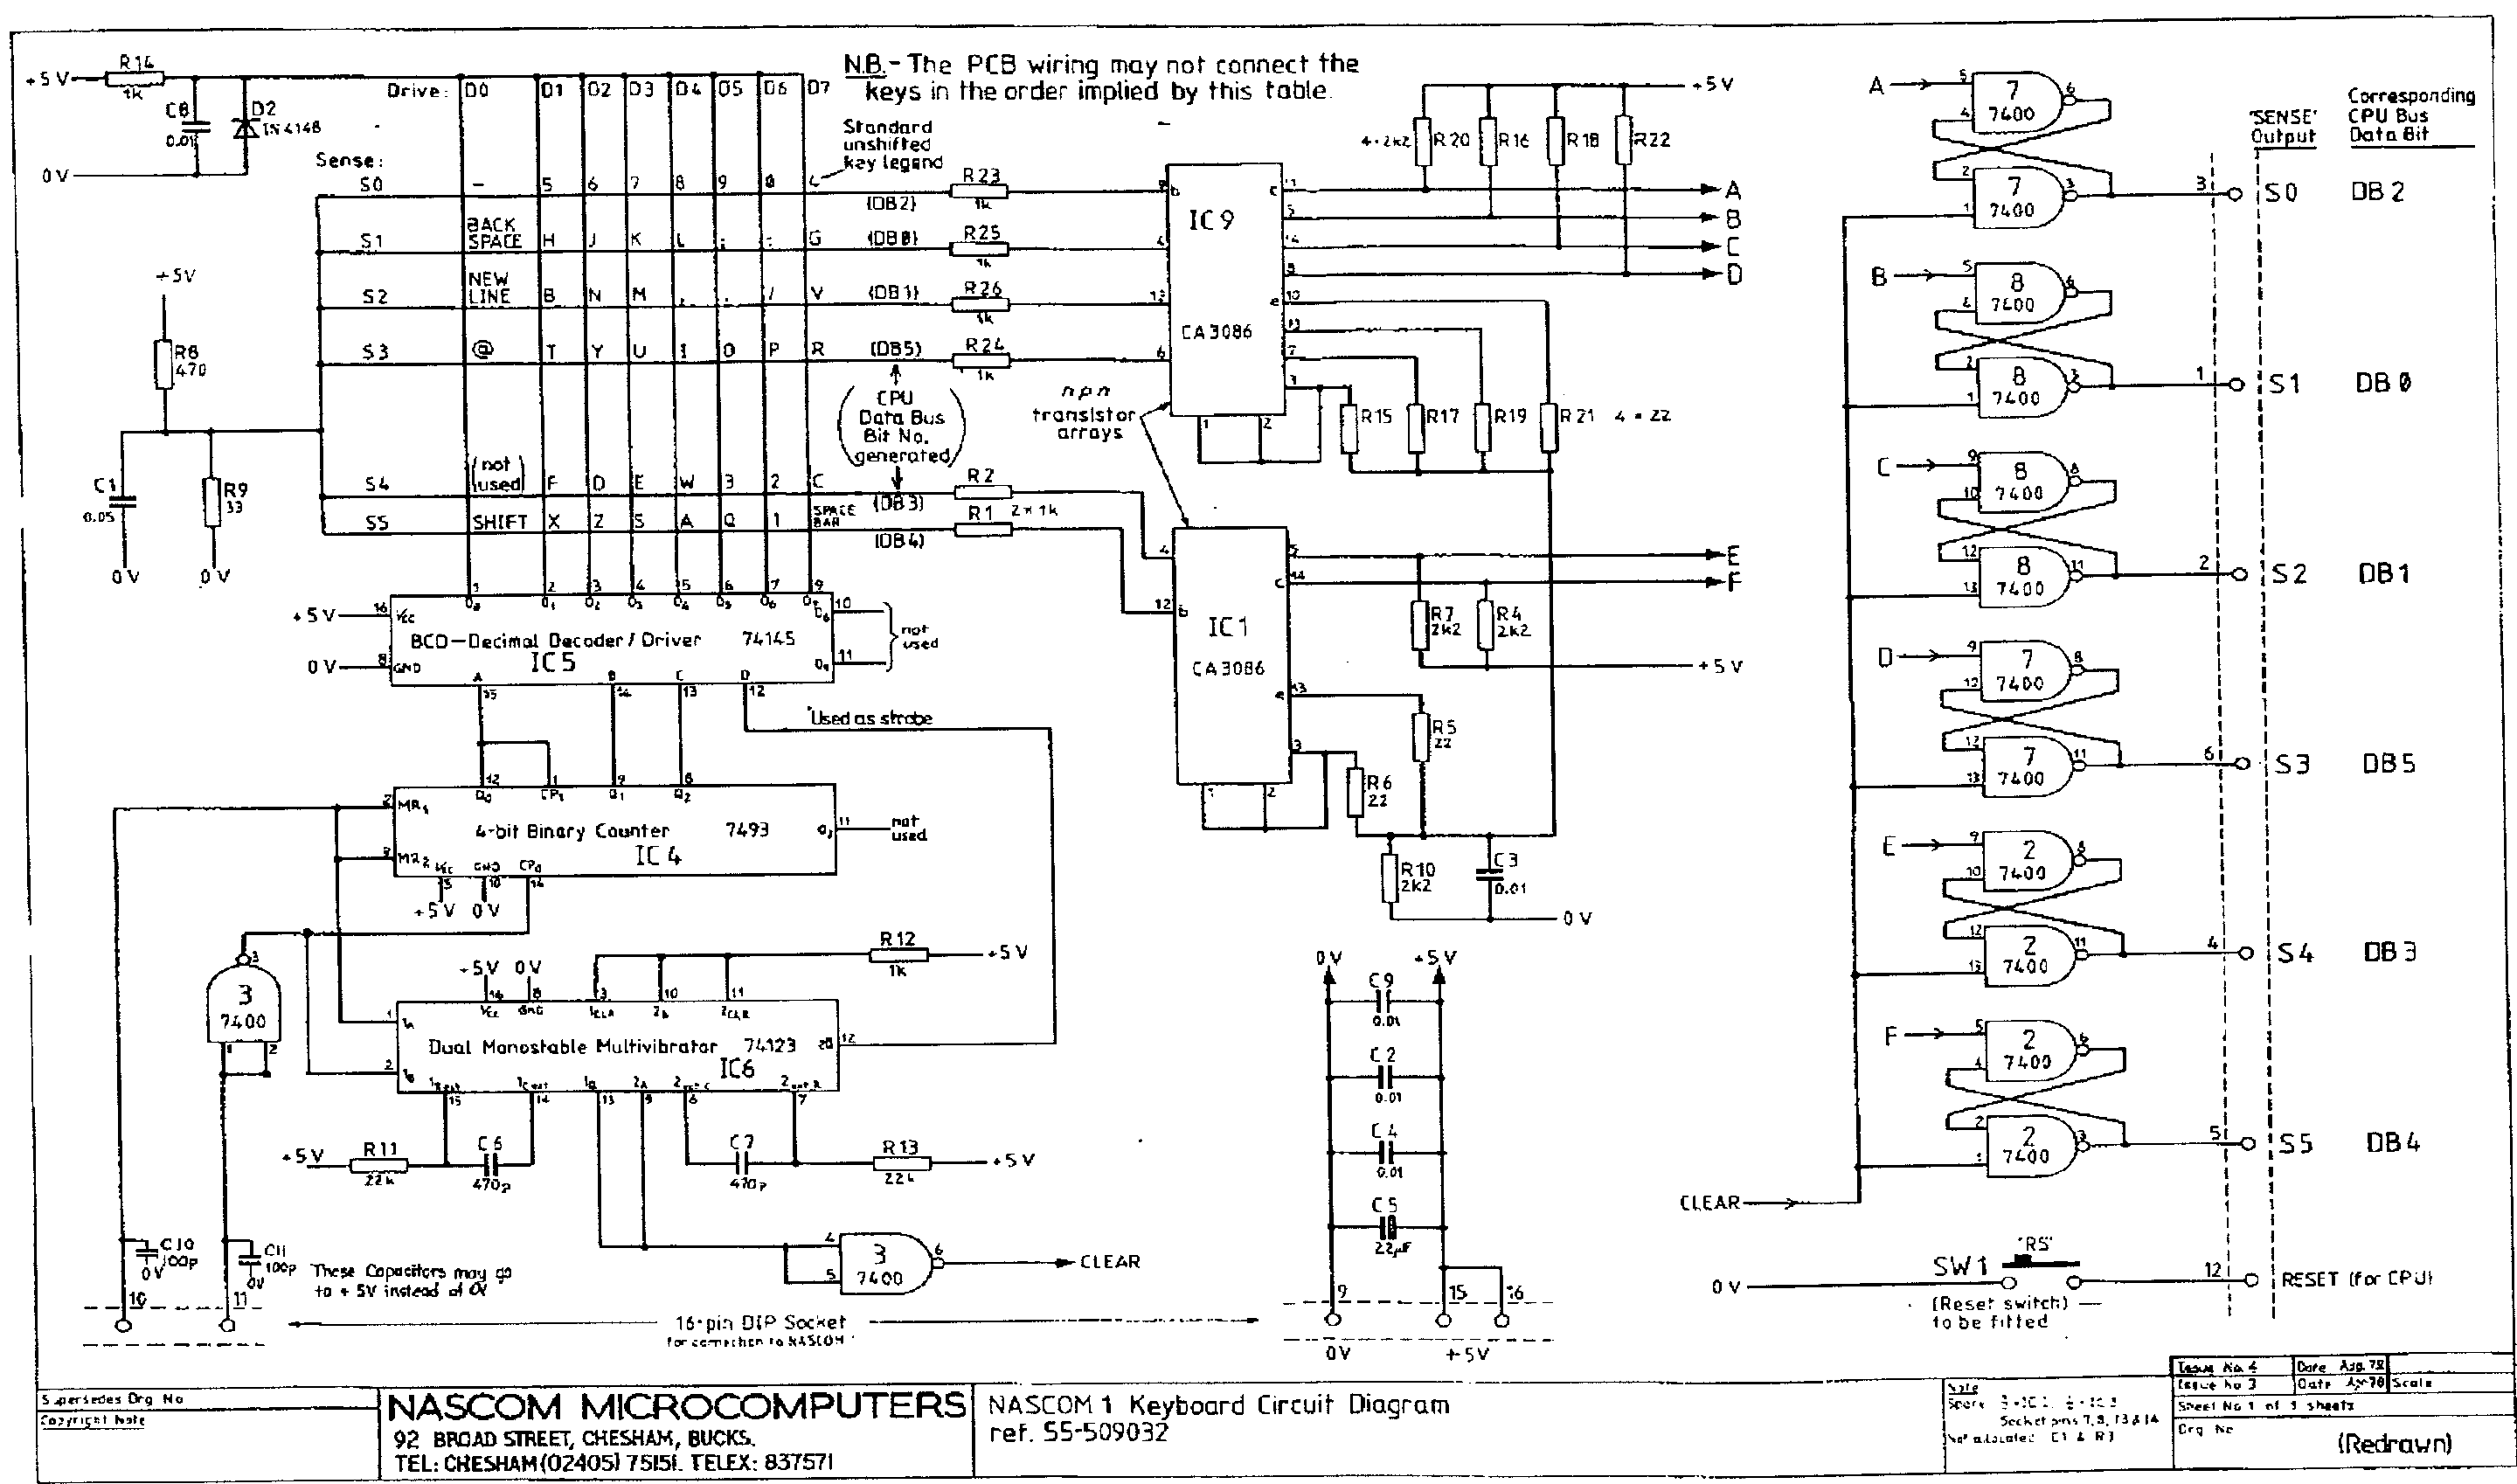 Image of circuit (as good as can be expected).